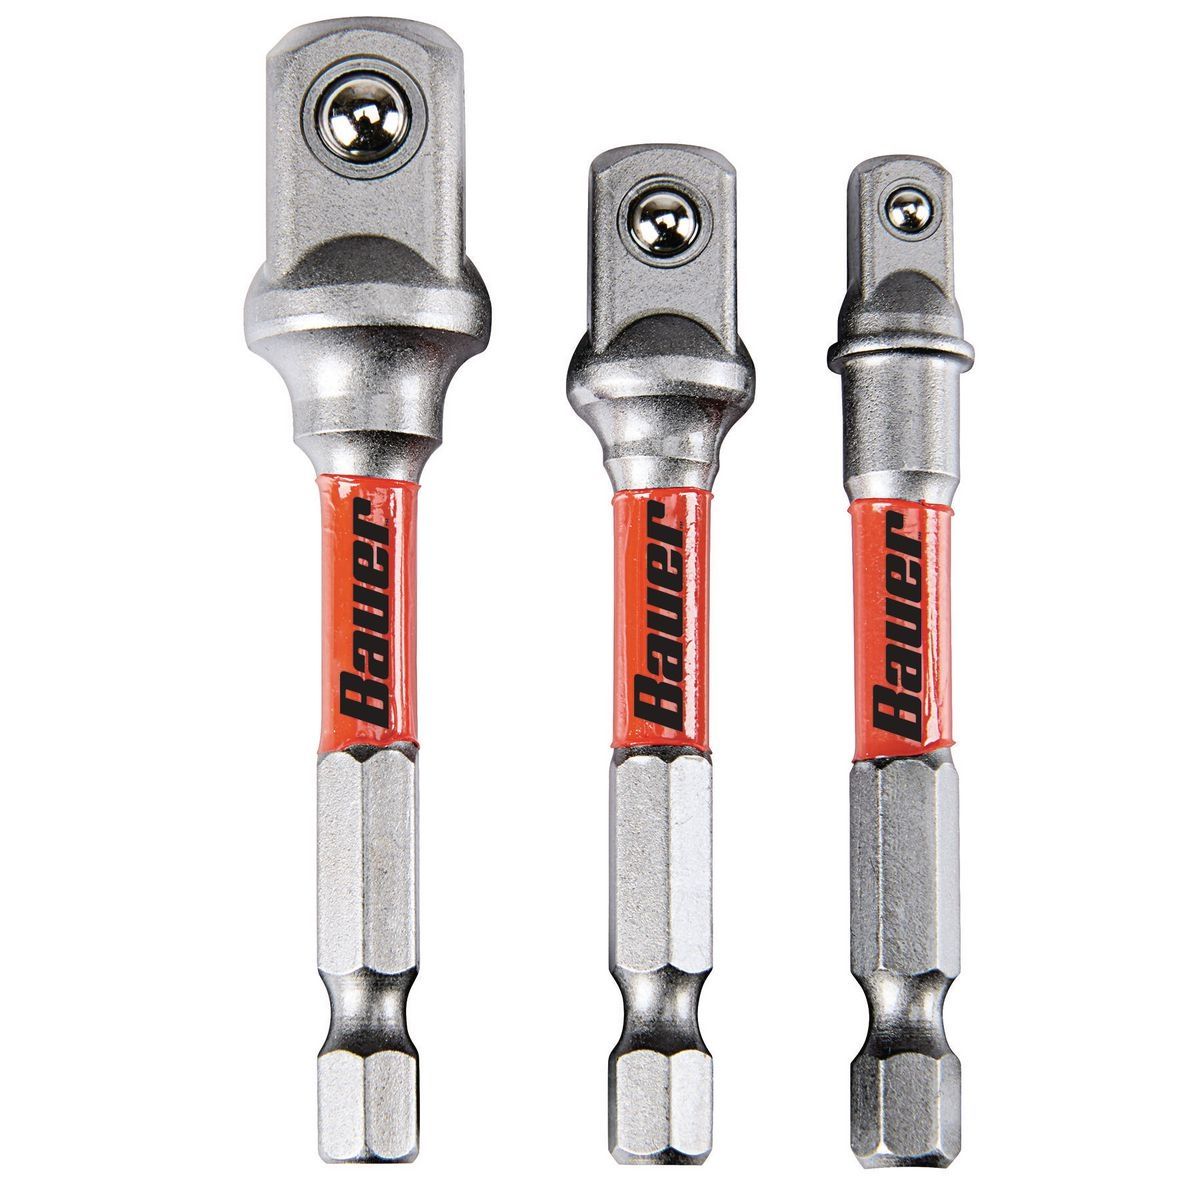 BAUER Impact Rated Hex Shank Socket Driver Set, 3 Pack